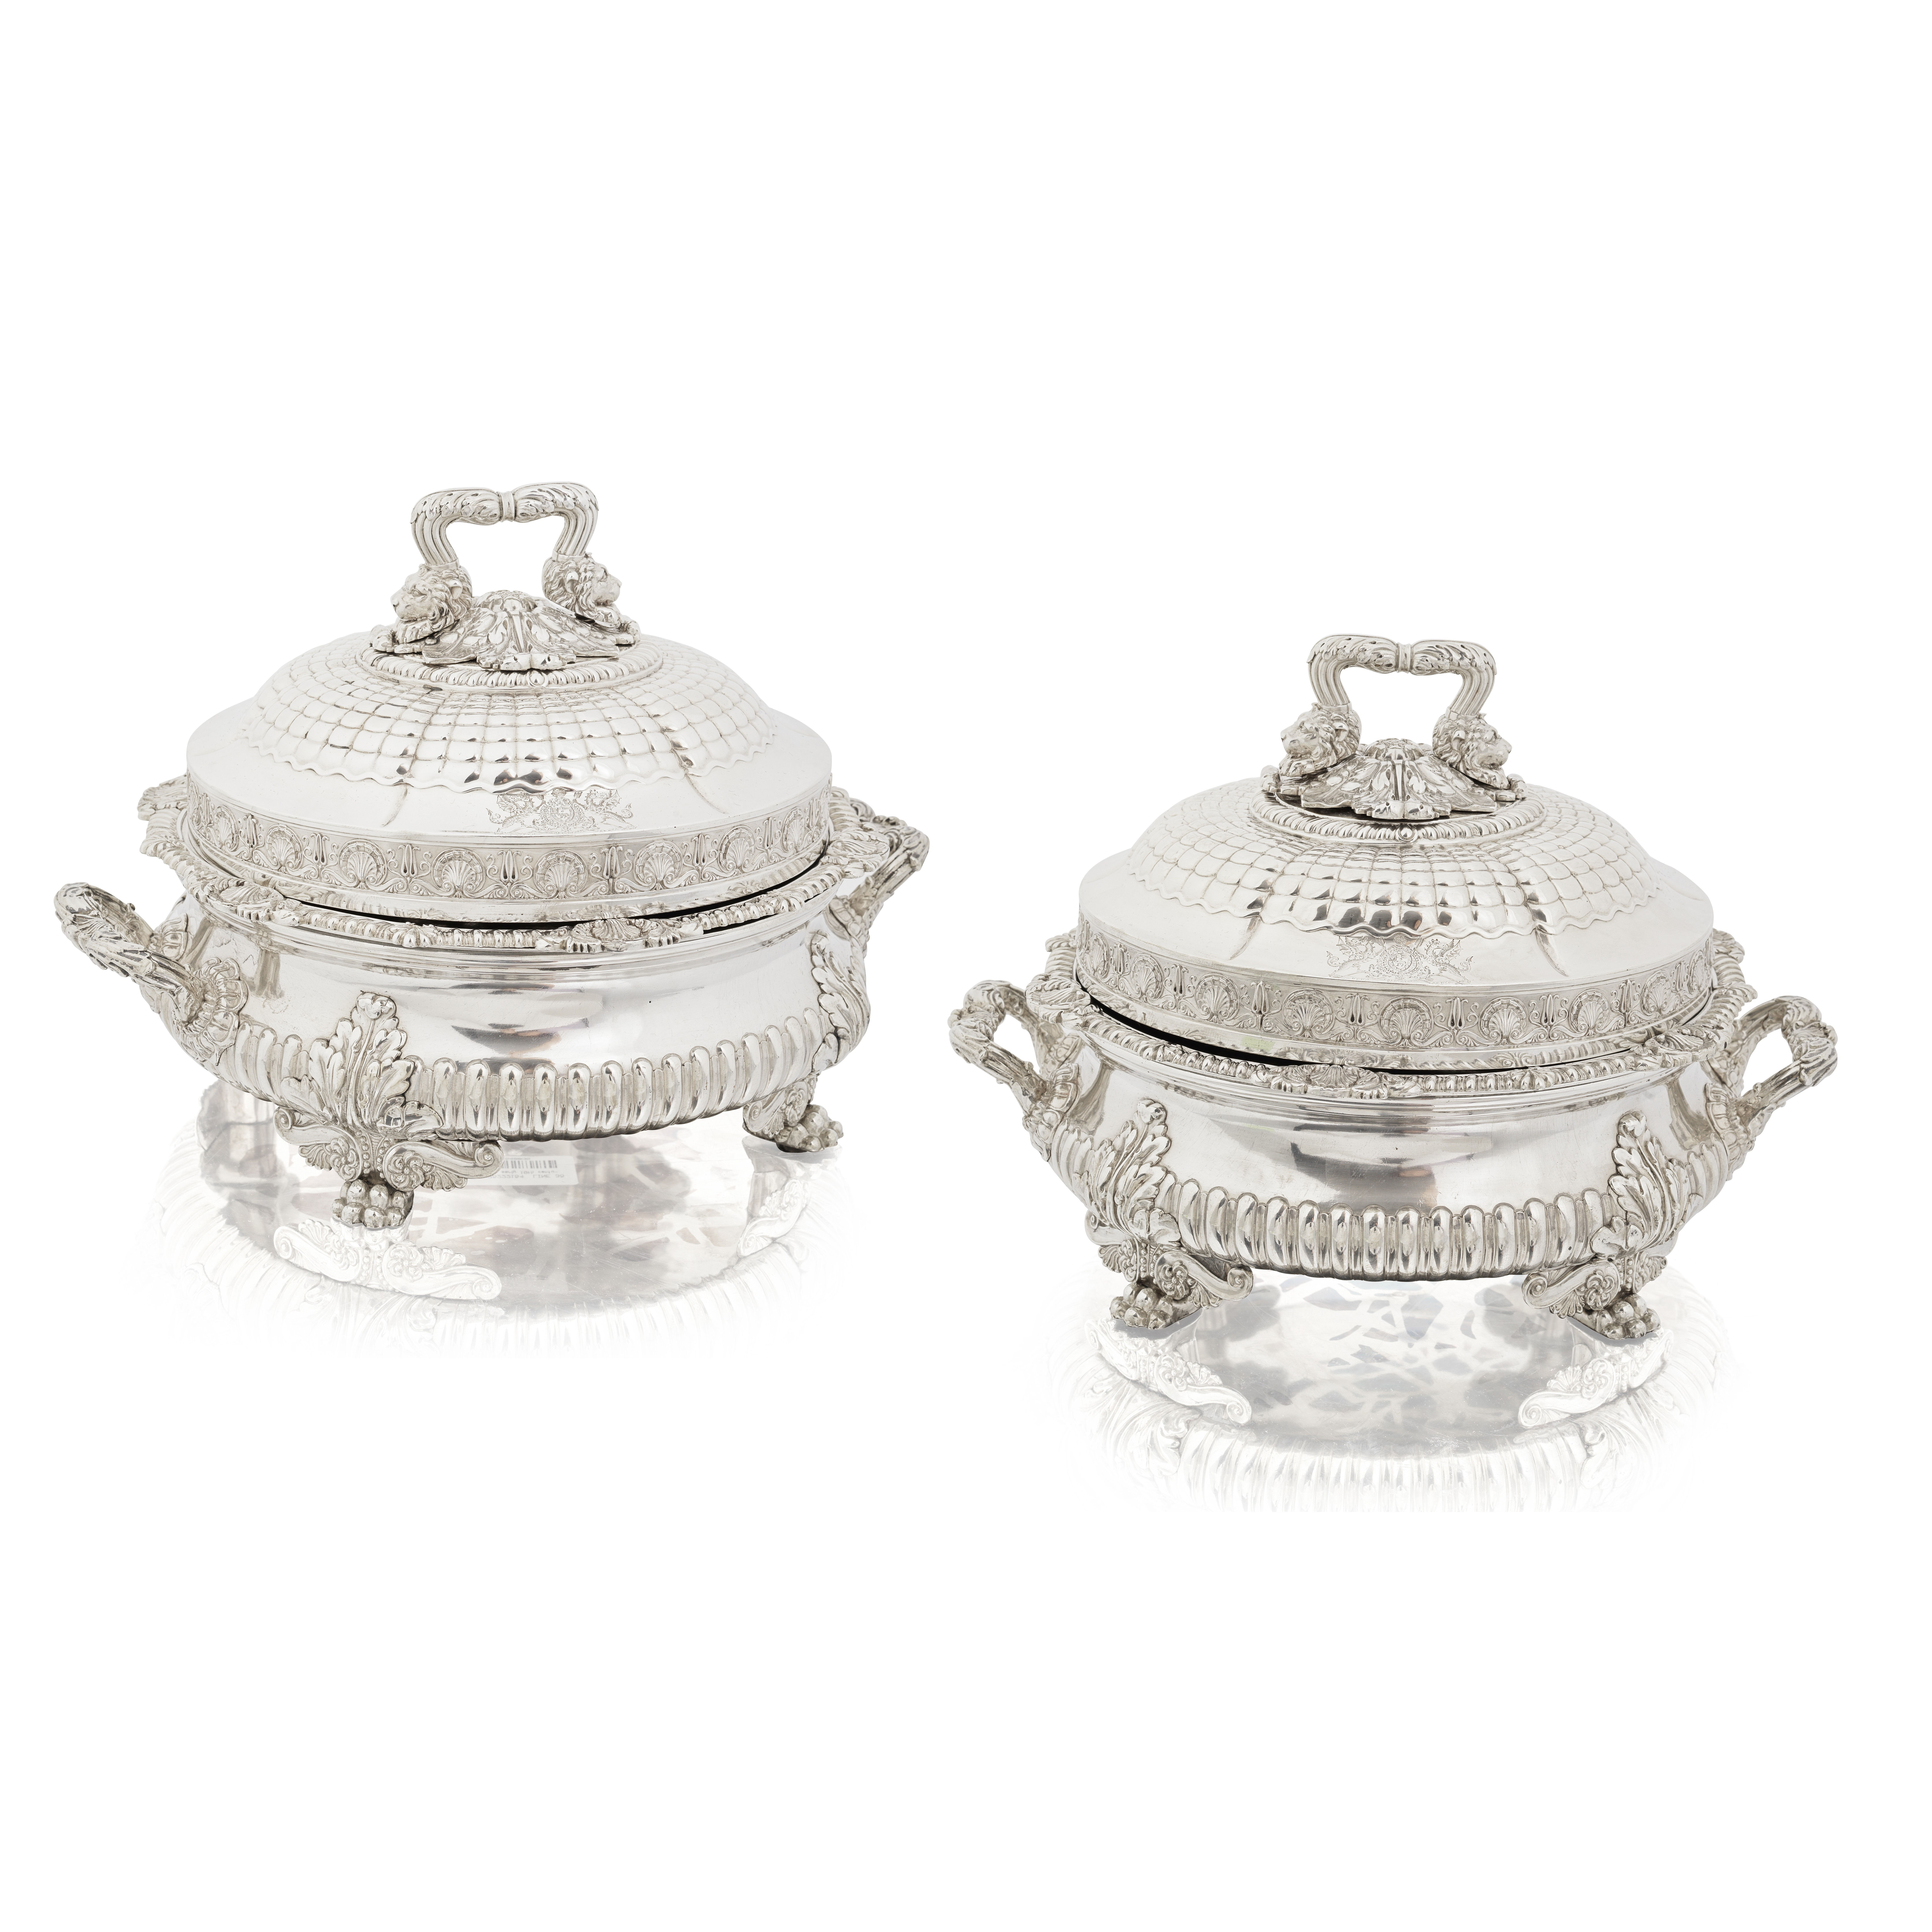 Two George III silver entr&#233;e dishes and covers on Old Sheffield plate warming bases Paul Sto...